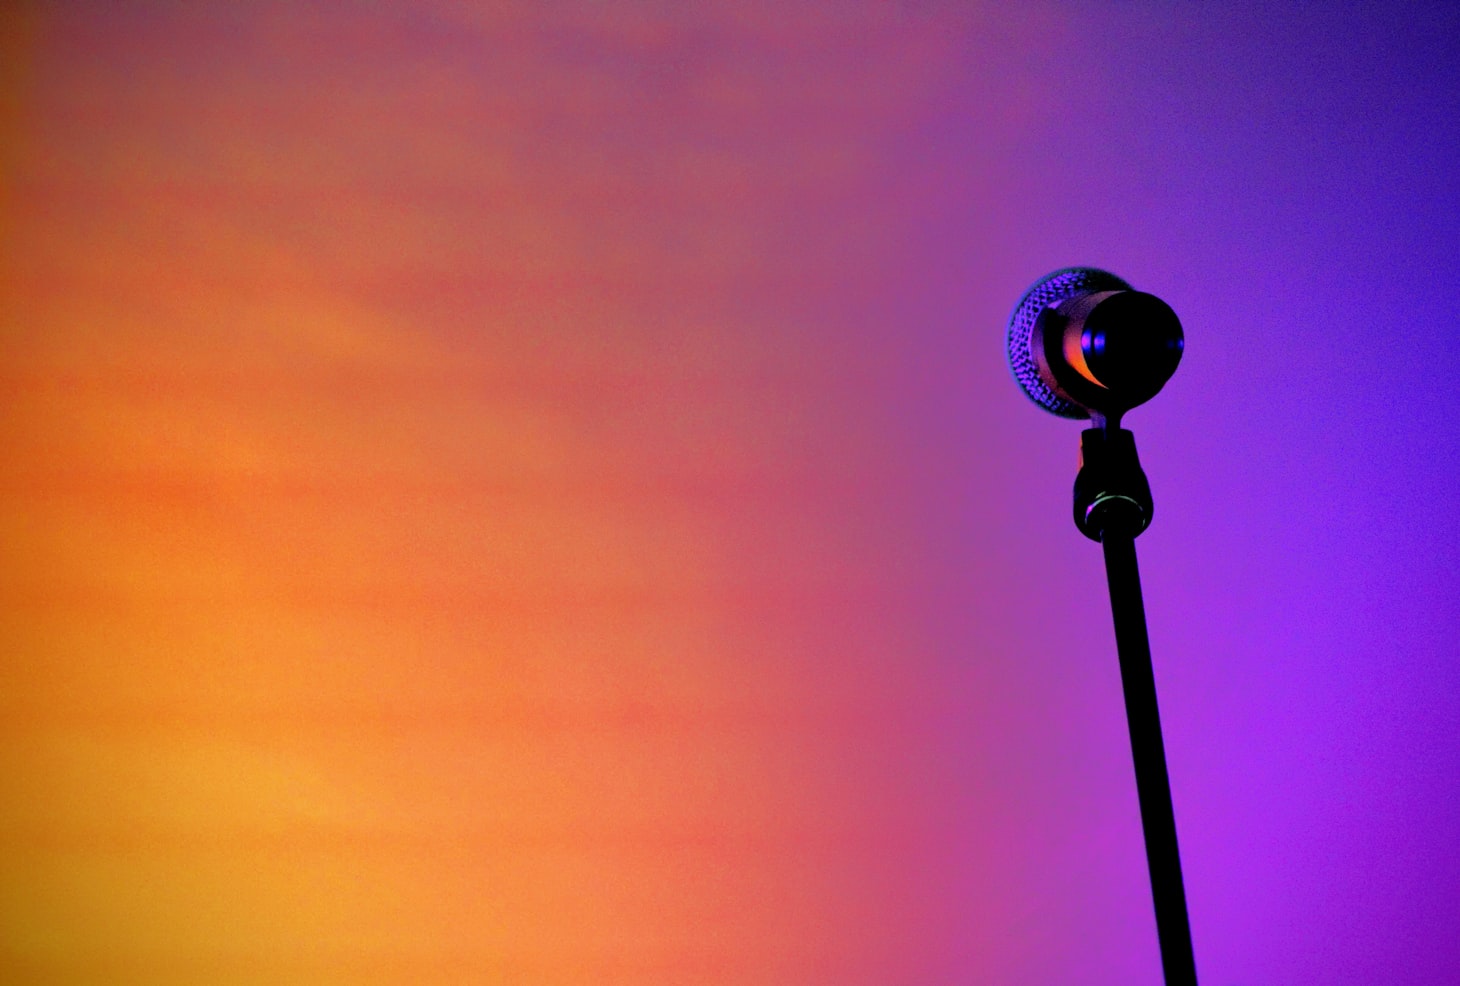 A microphone on a stand in front of a yellow-to-purple background